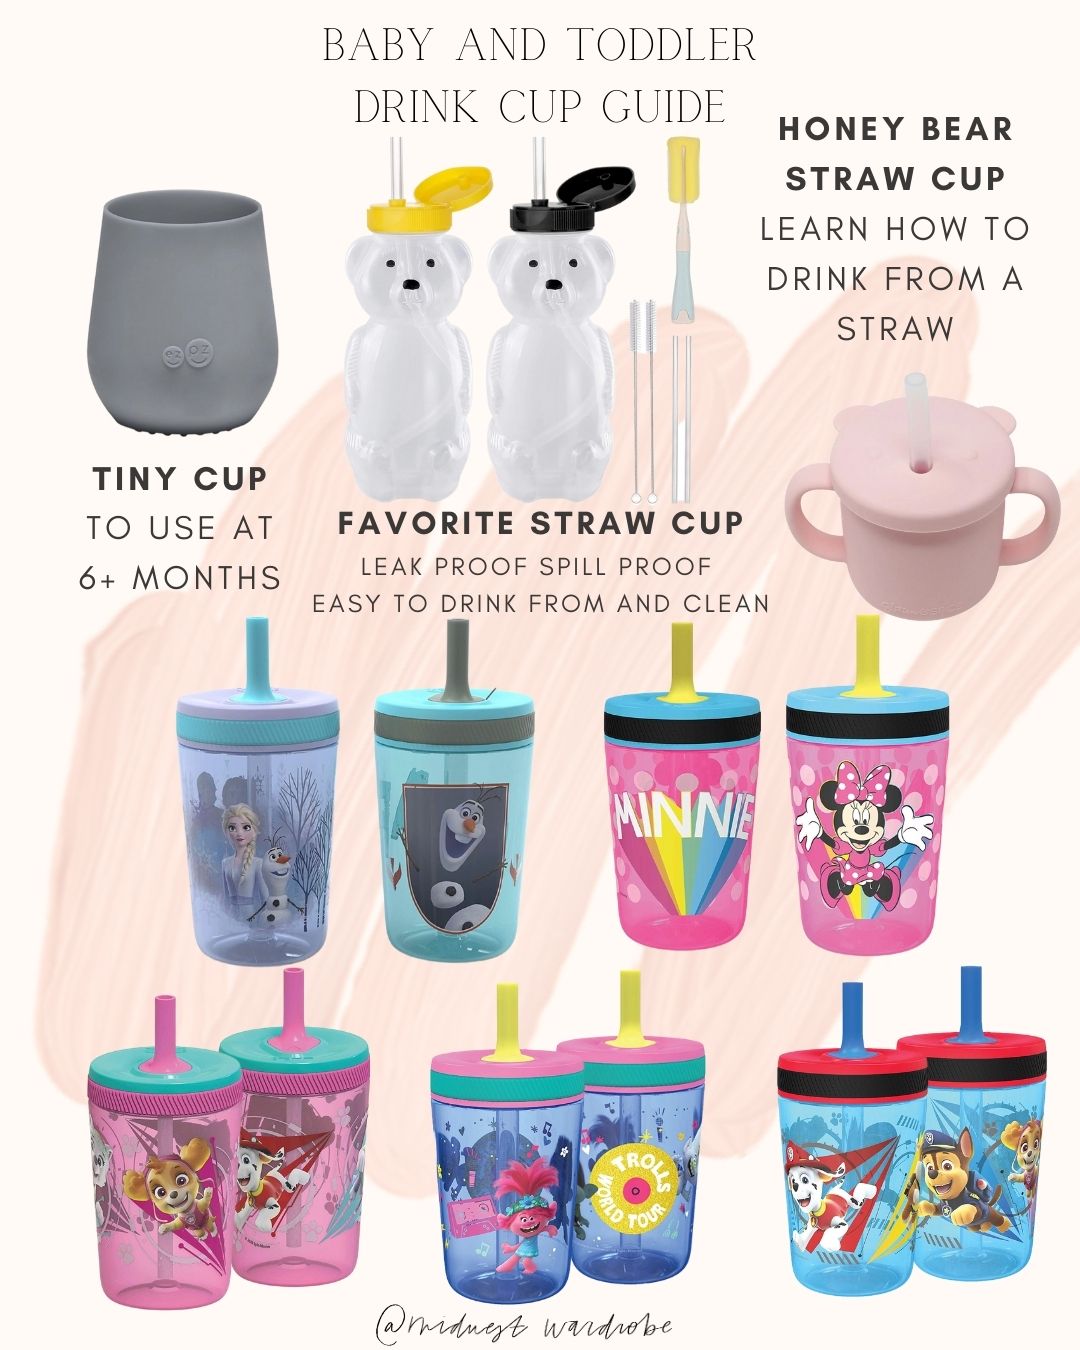 https://midwestwardrobe.com/wp-content/uploads/2021/03/Baby-and-Toddler-Drink-Cup-Guide.jpg